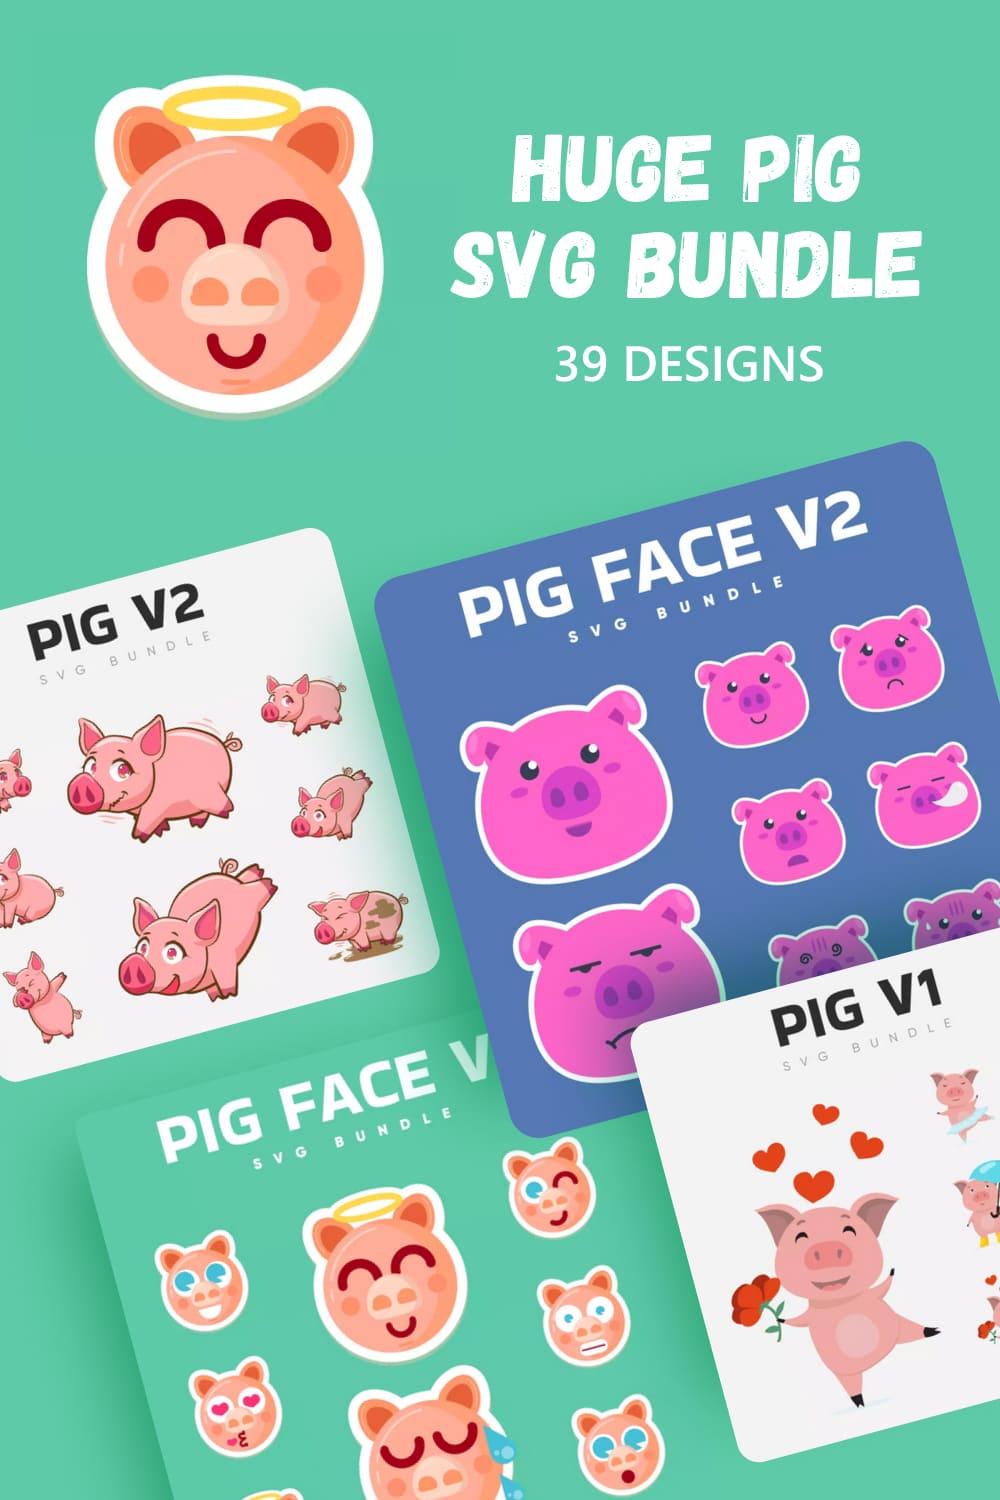 Pig face stickers are shown on a green background.